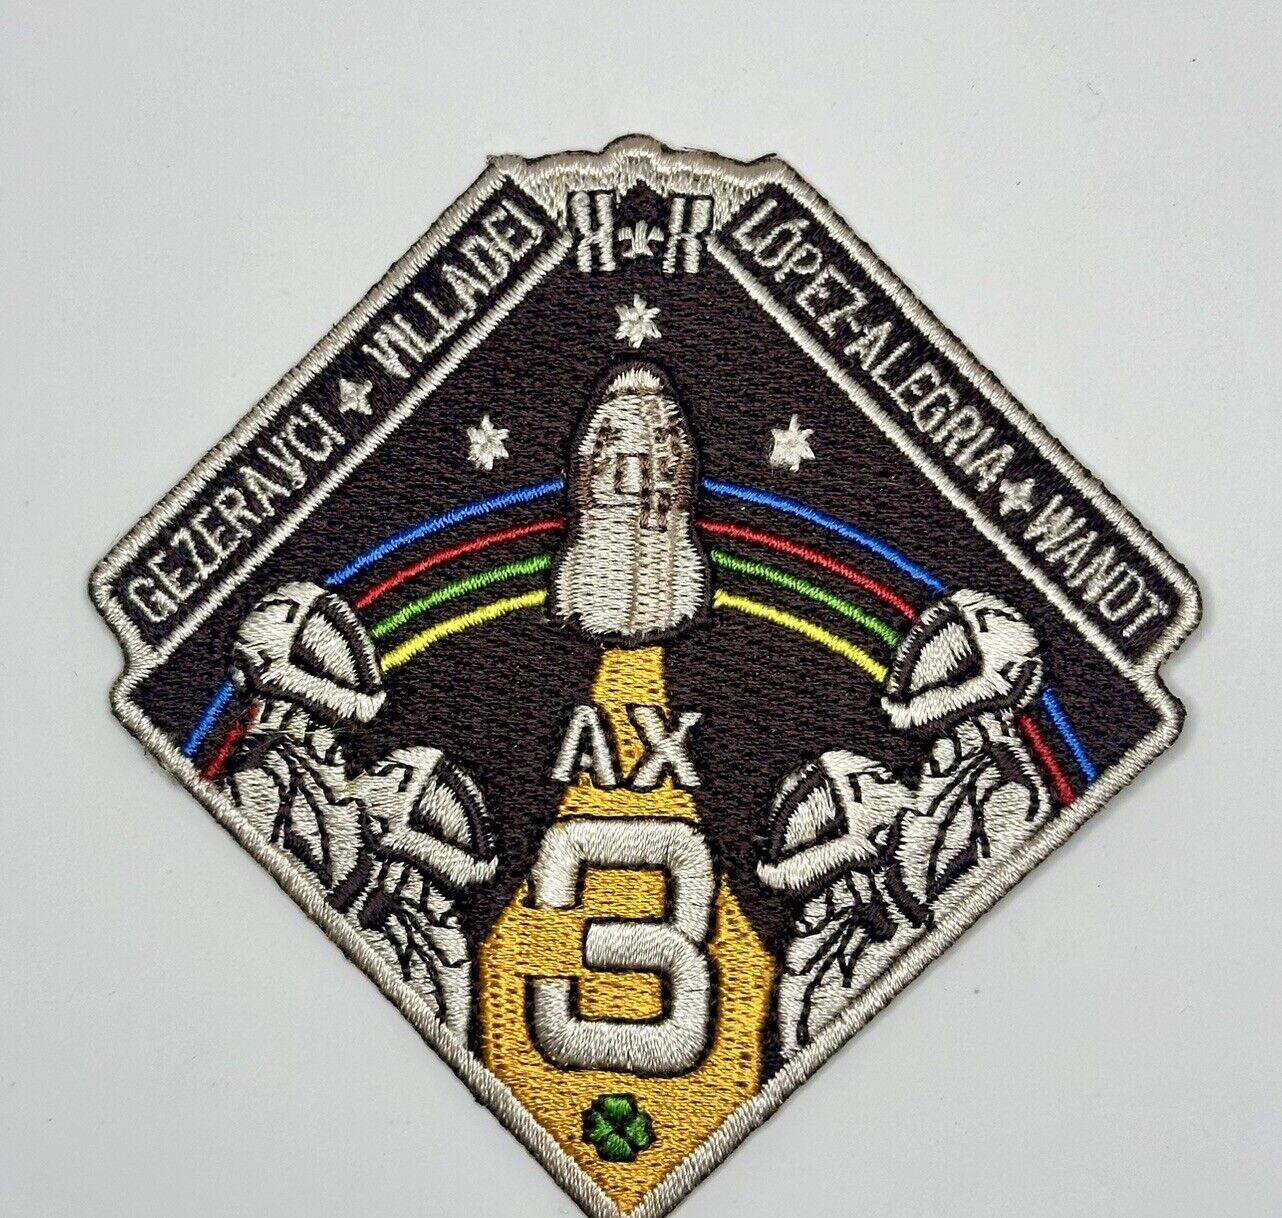 ORIGINAL SPACEX AX 3 DRAGON MISSION PATCH NASA FALCON 9 ISS 2024 3.5”